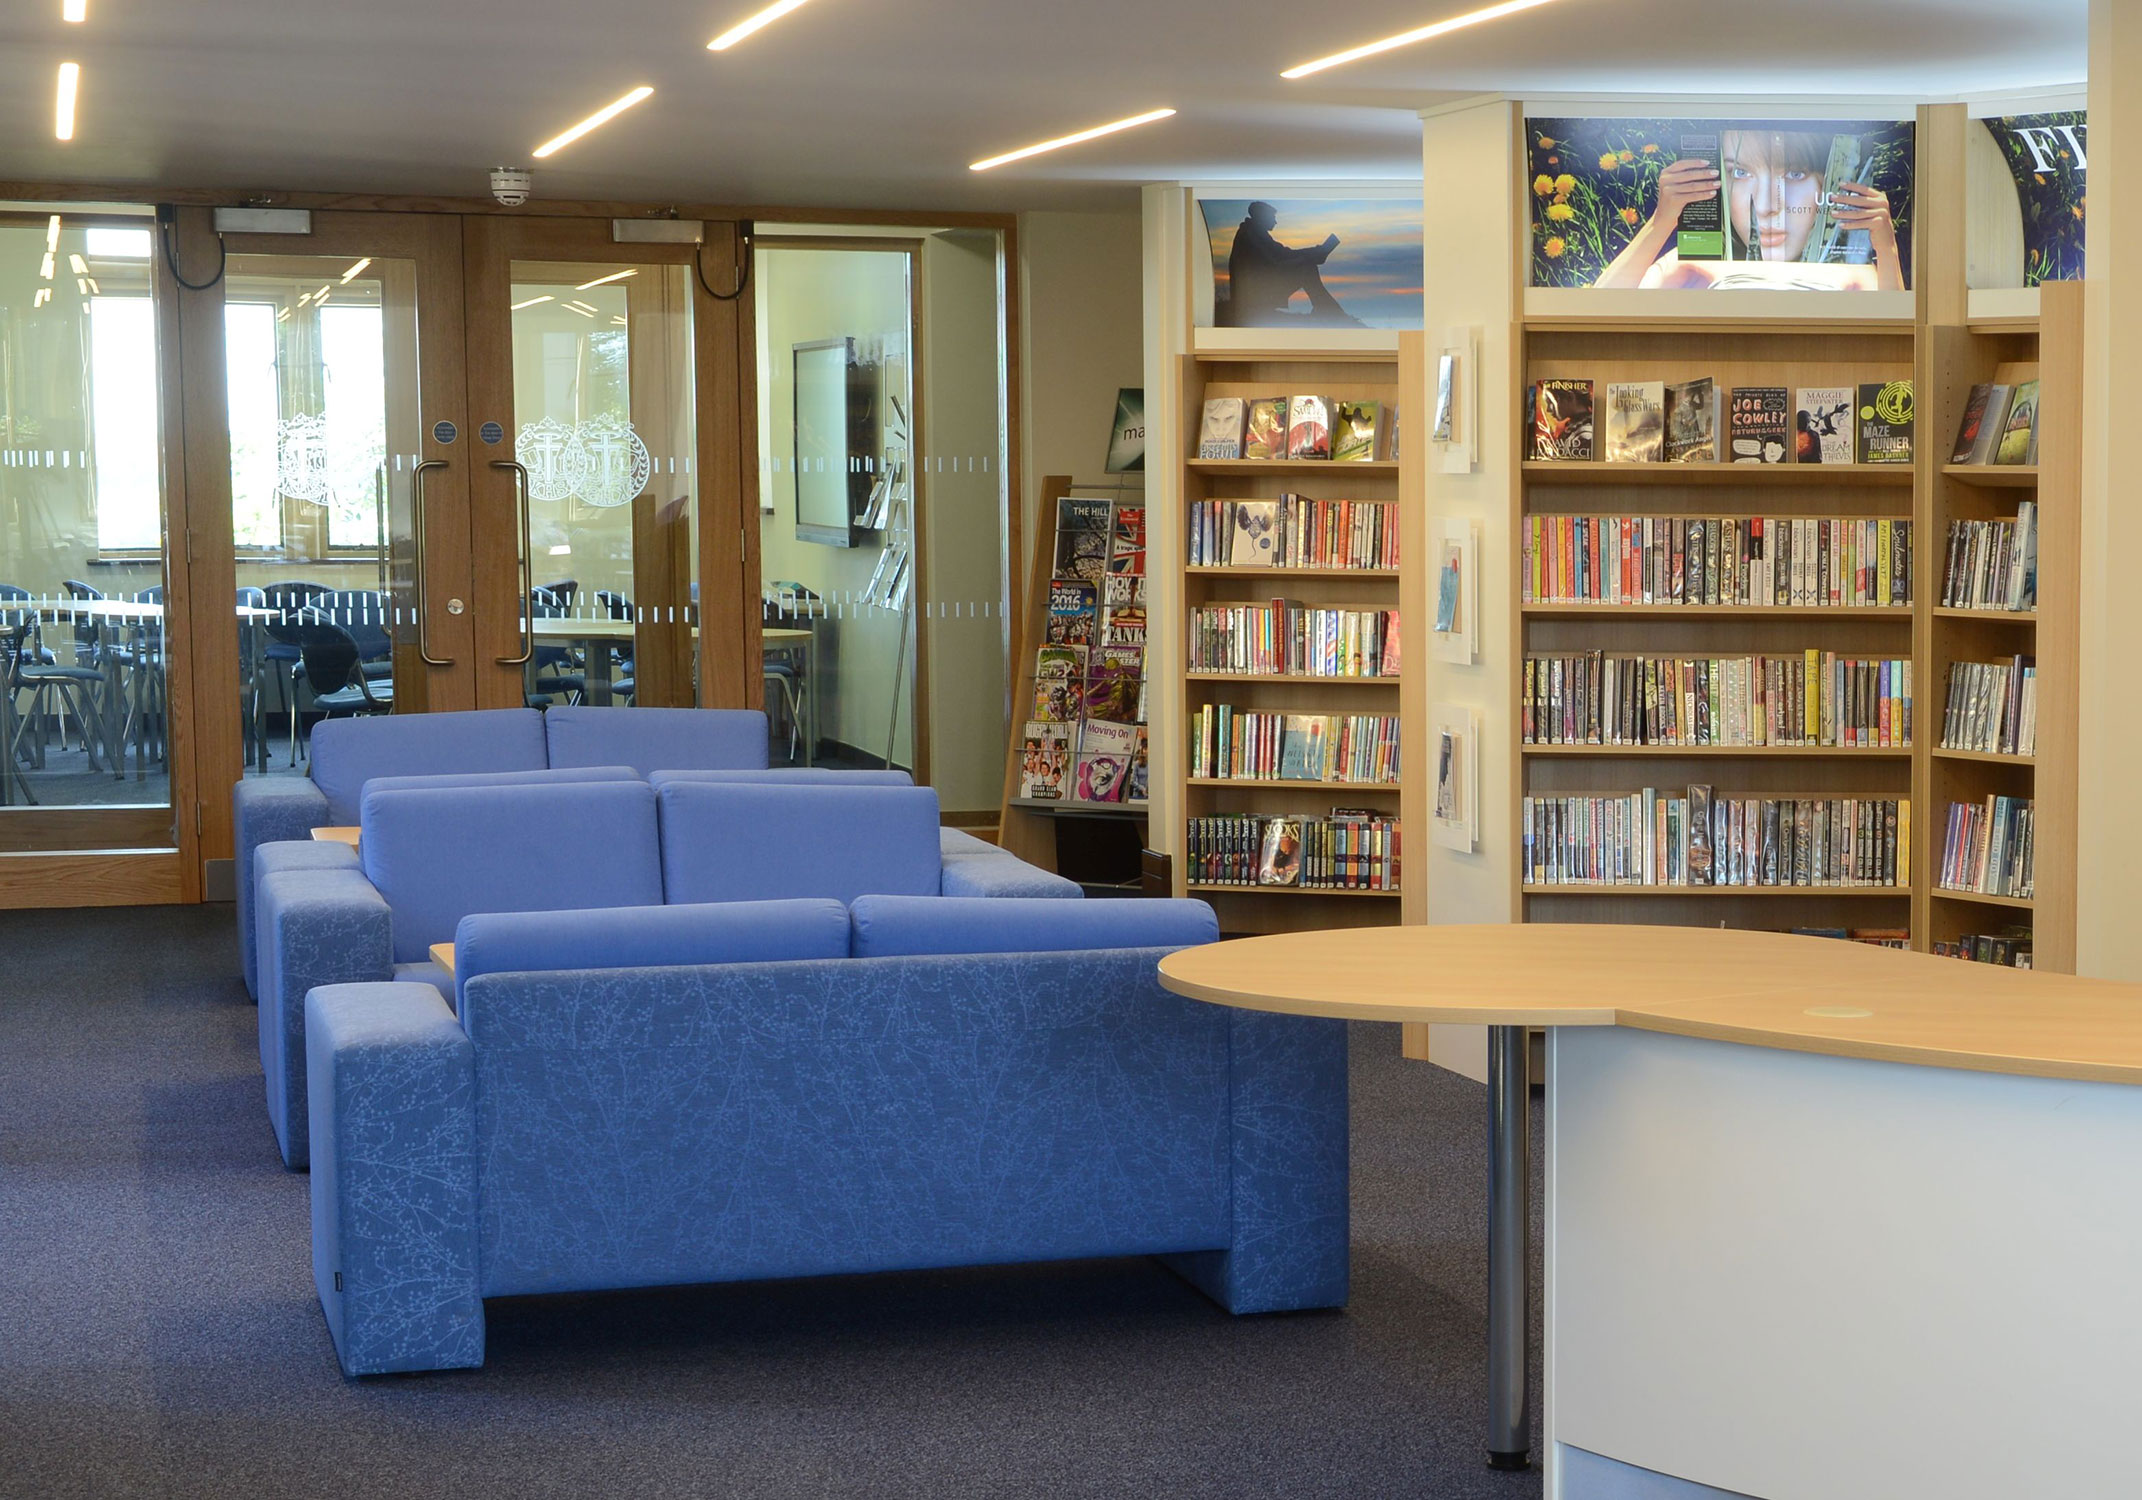 Creating a welcoming school library